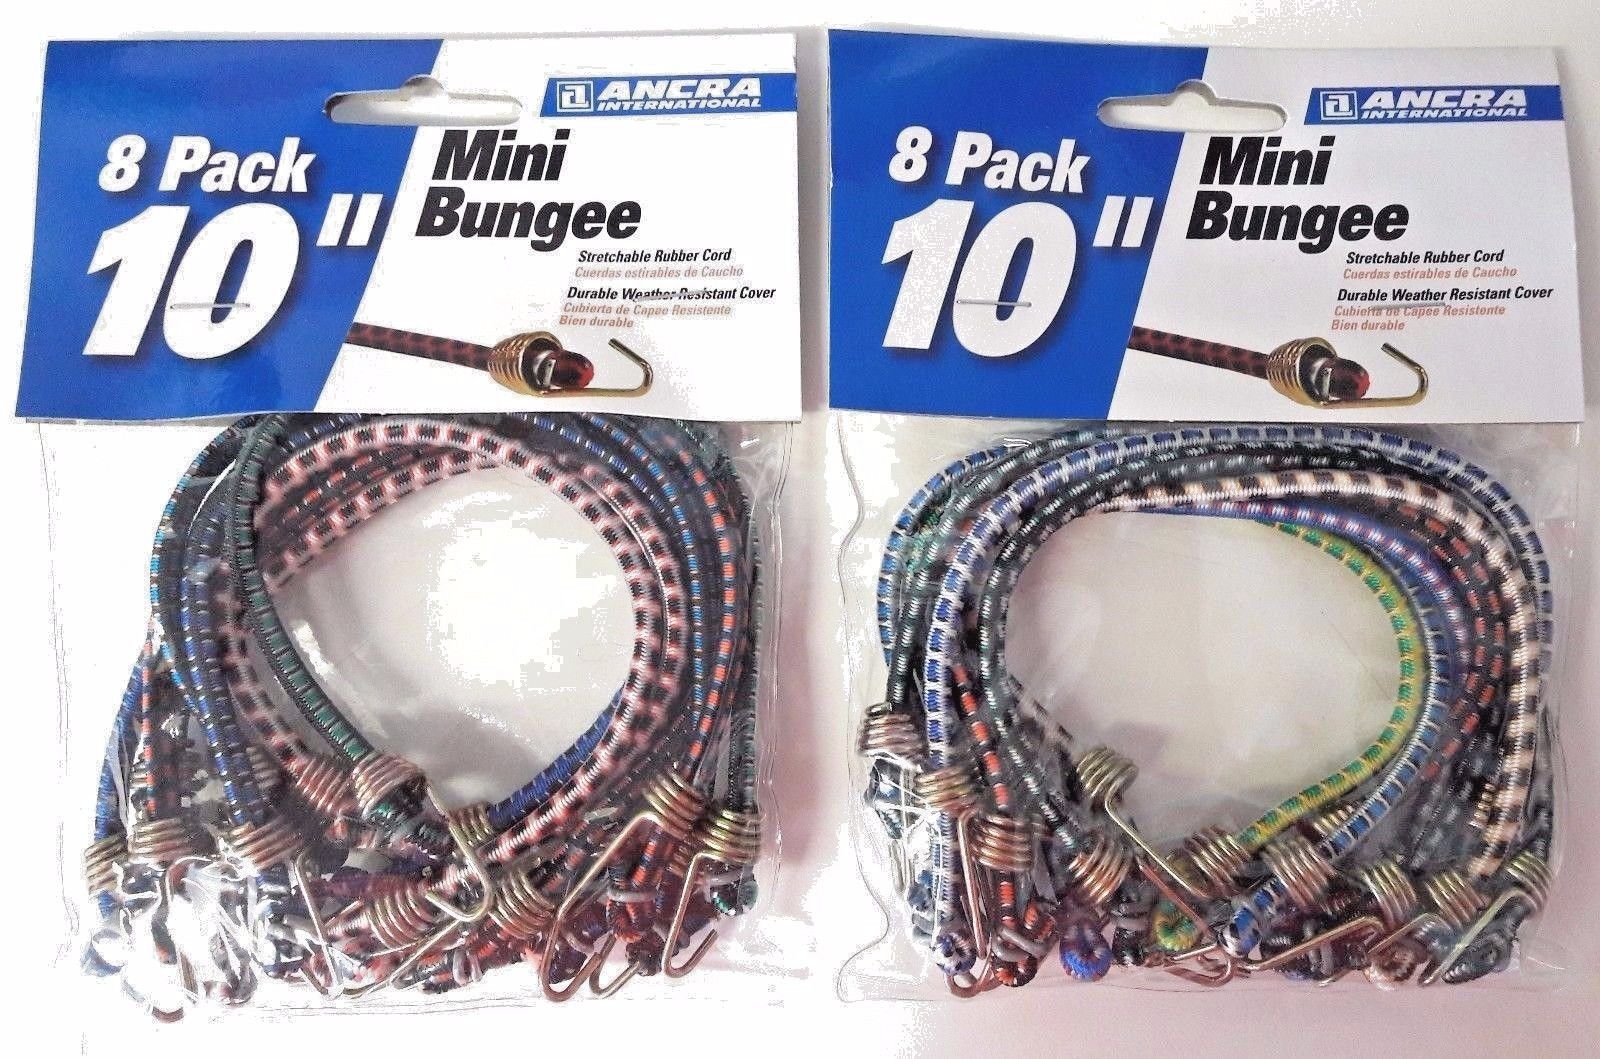 Ancra 95721 10" Mini Bungee Cords in Assorted Colors, 2-8 Packs